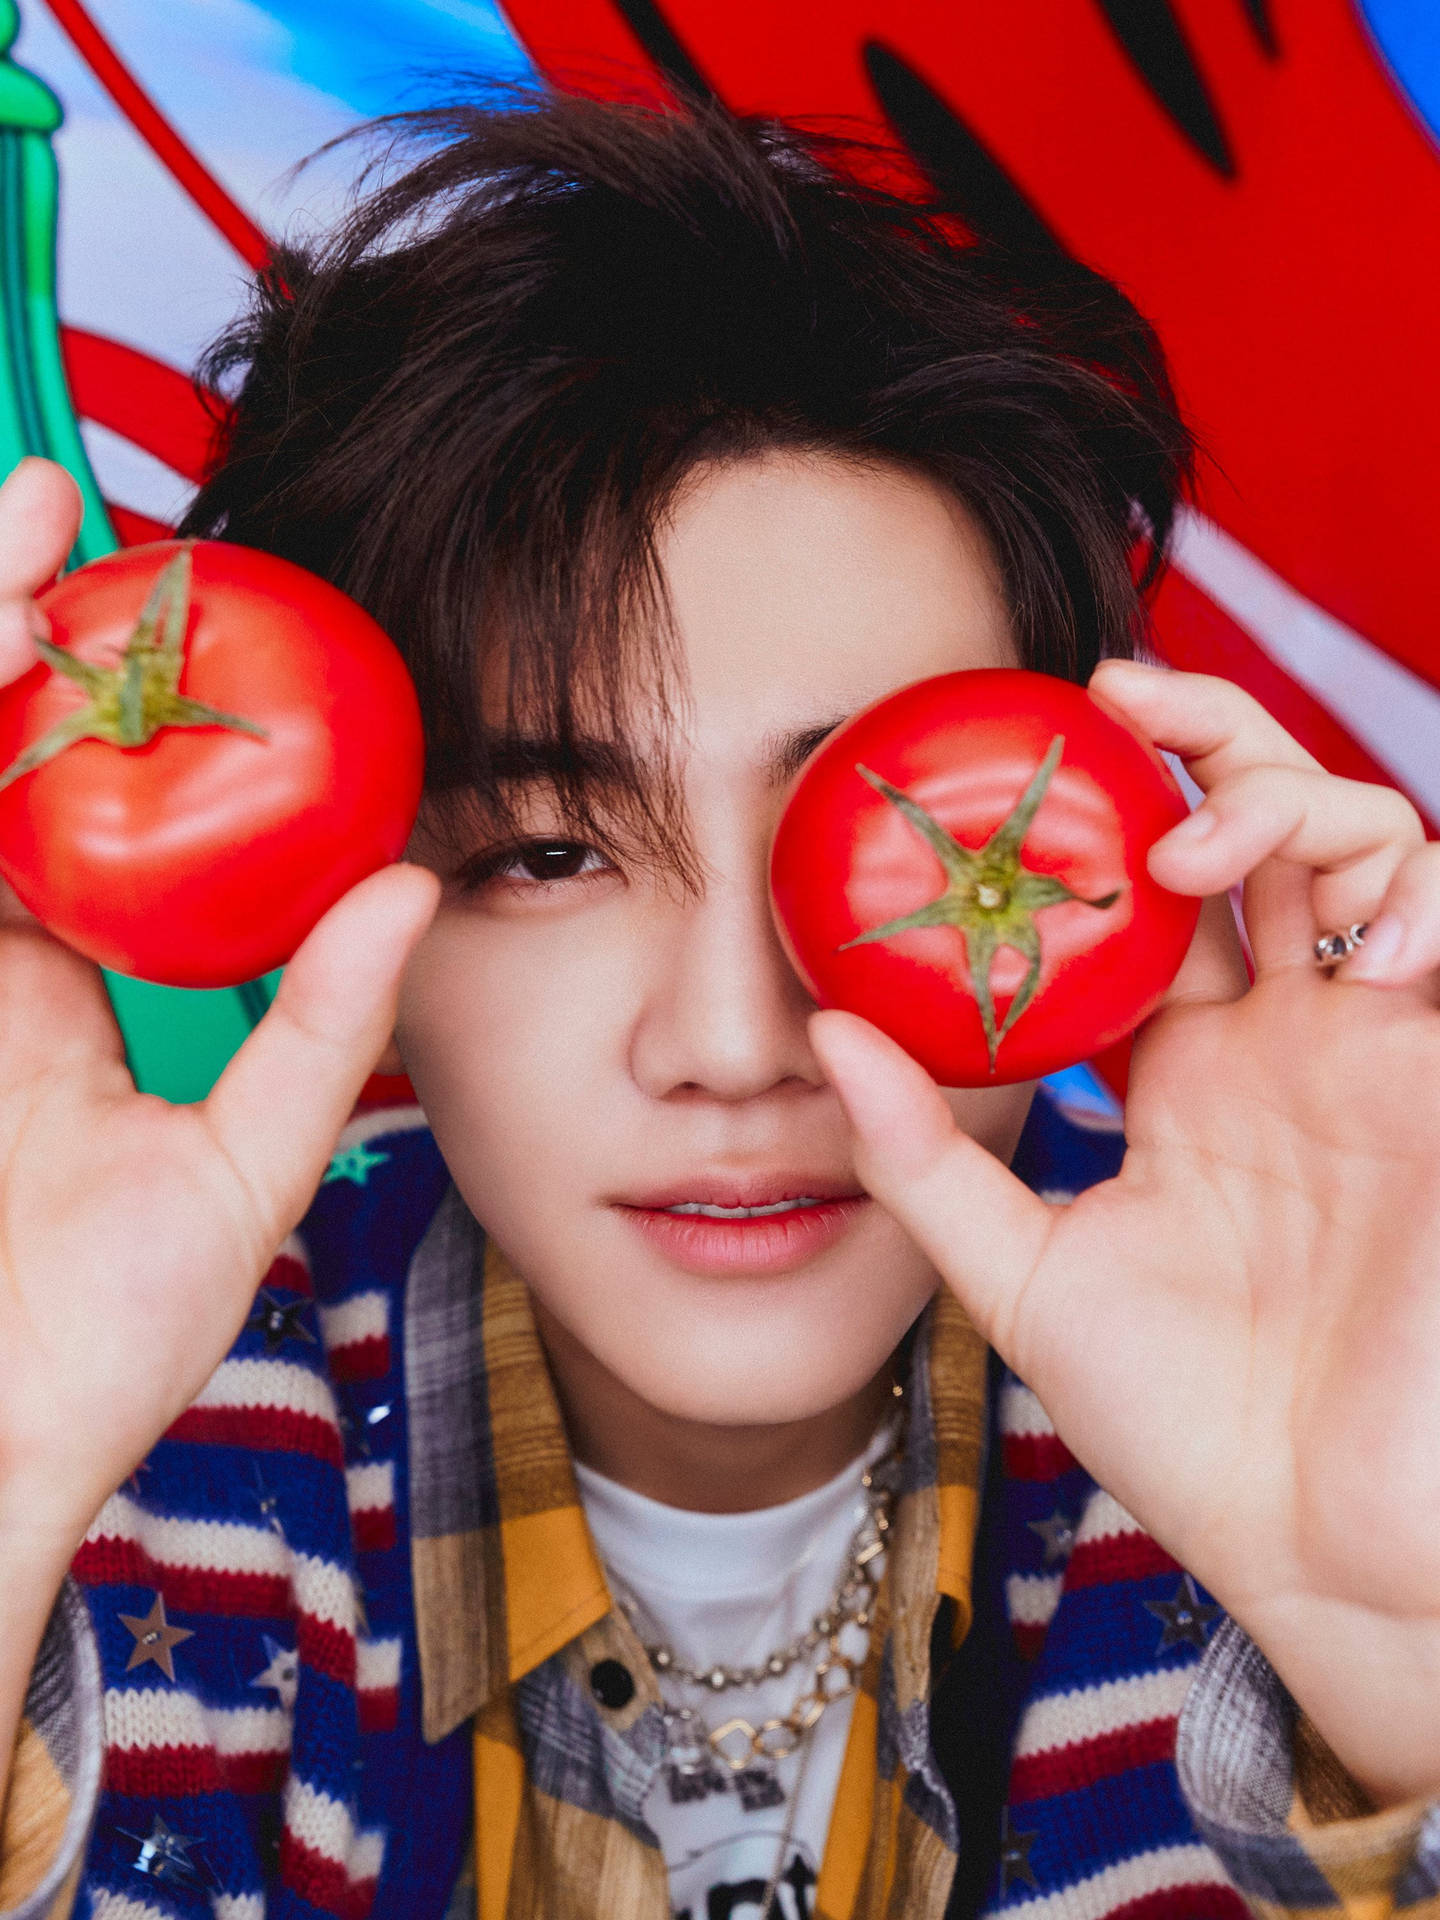 Jaemin NCT With Tomatoes Wallpaper